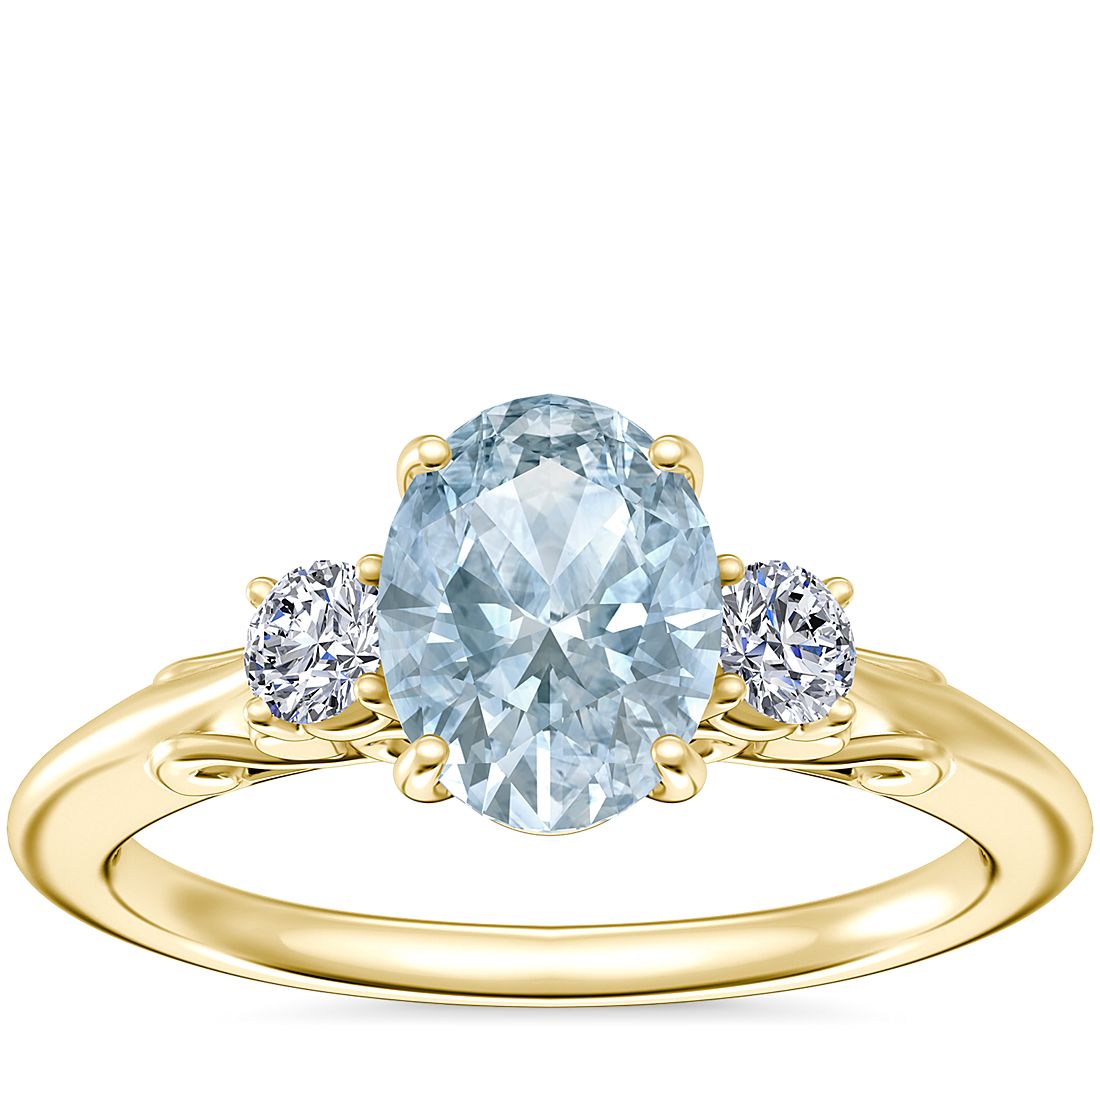 Vintage Three Stone Engagement Ring with Oval Aquamarine in 14k Yellow Gold (8x6mm)